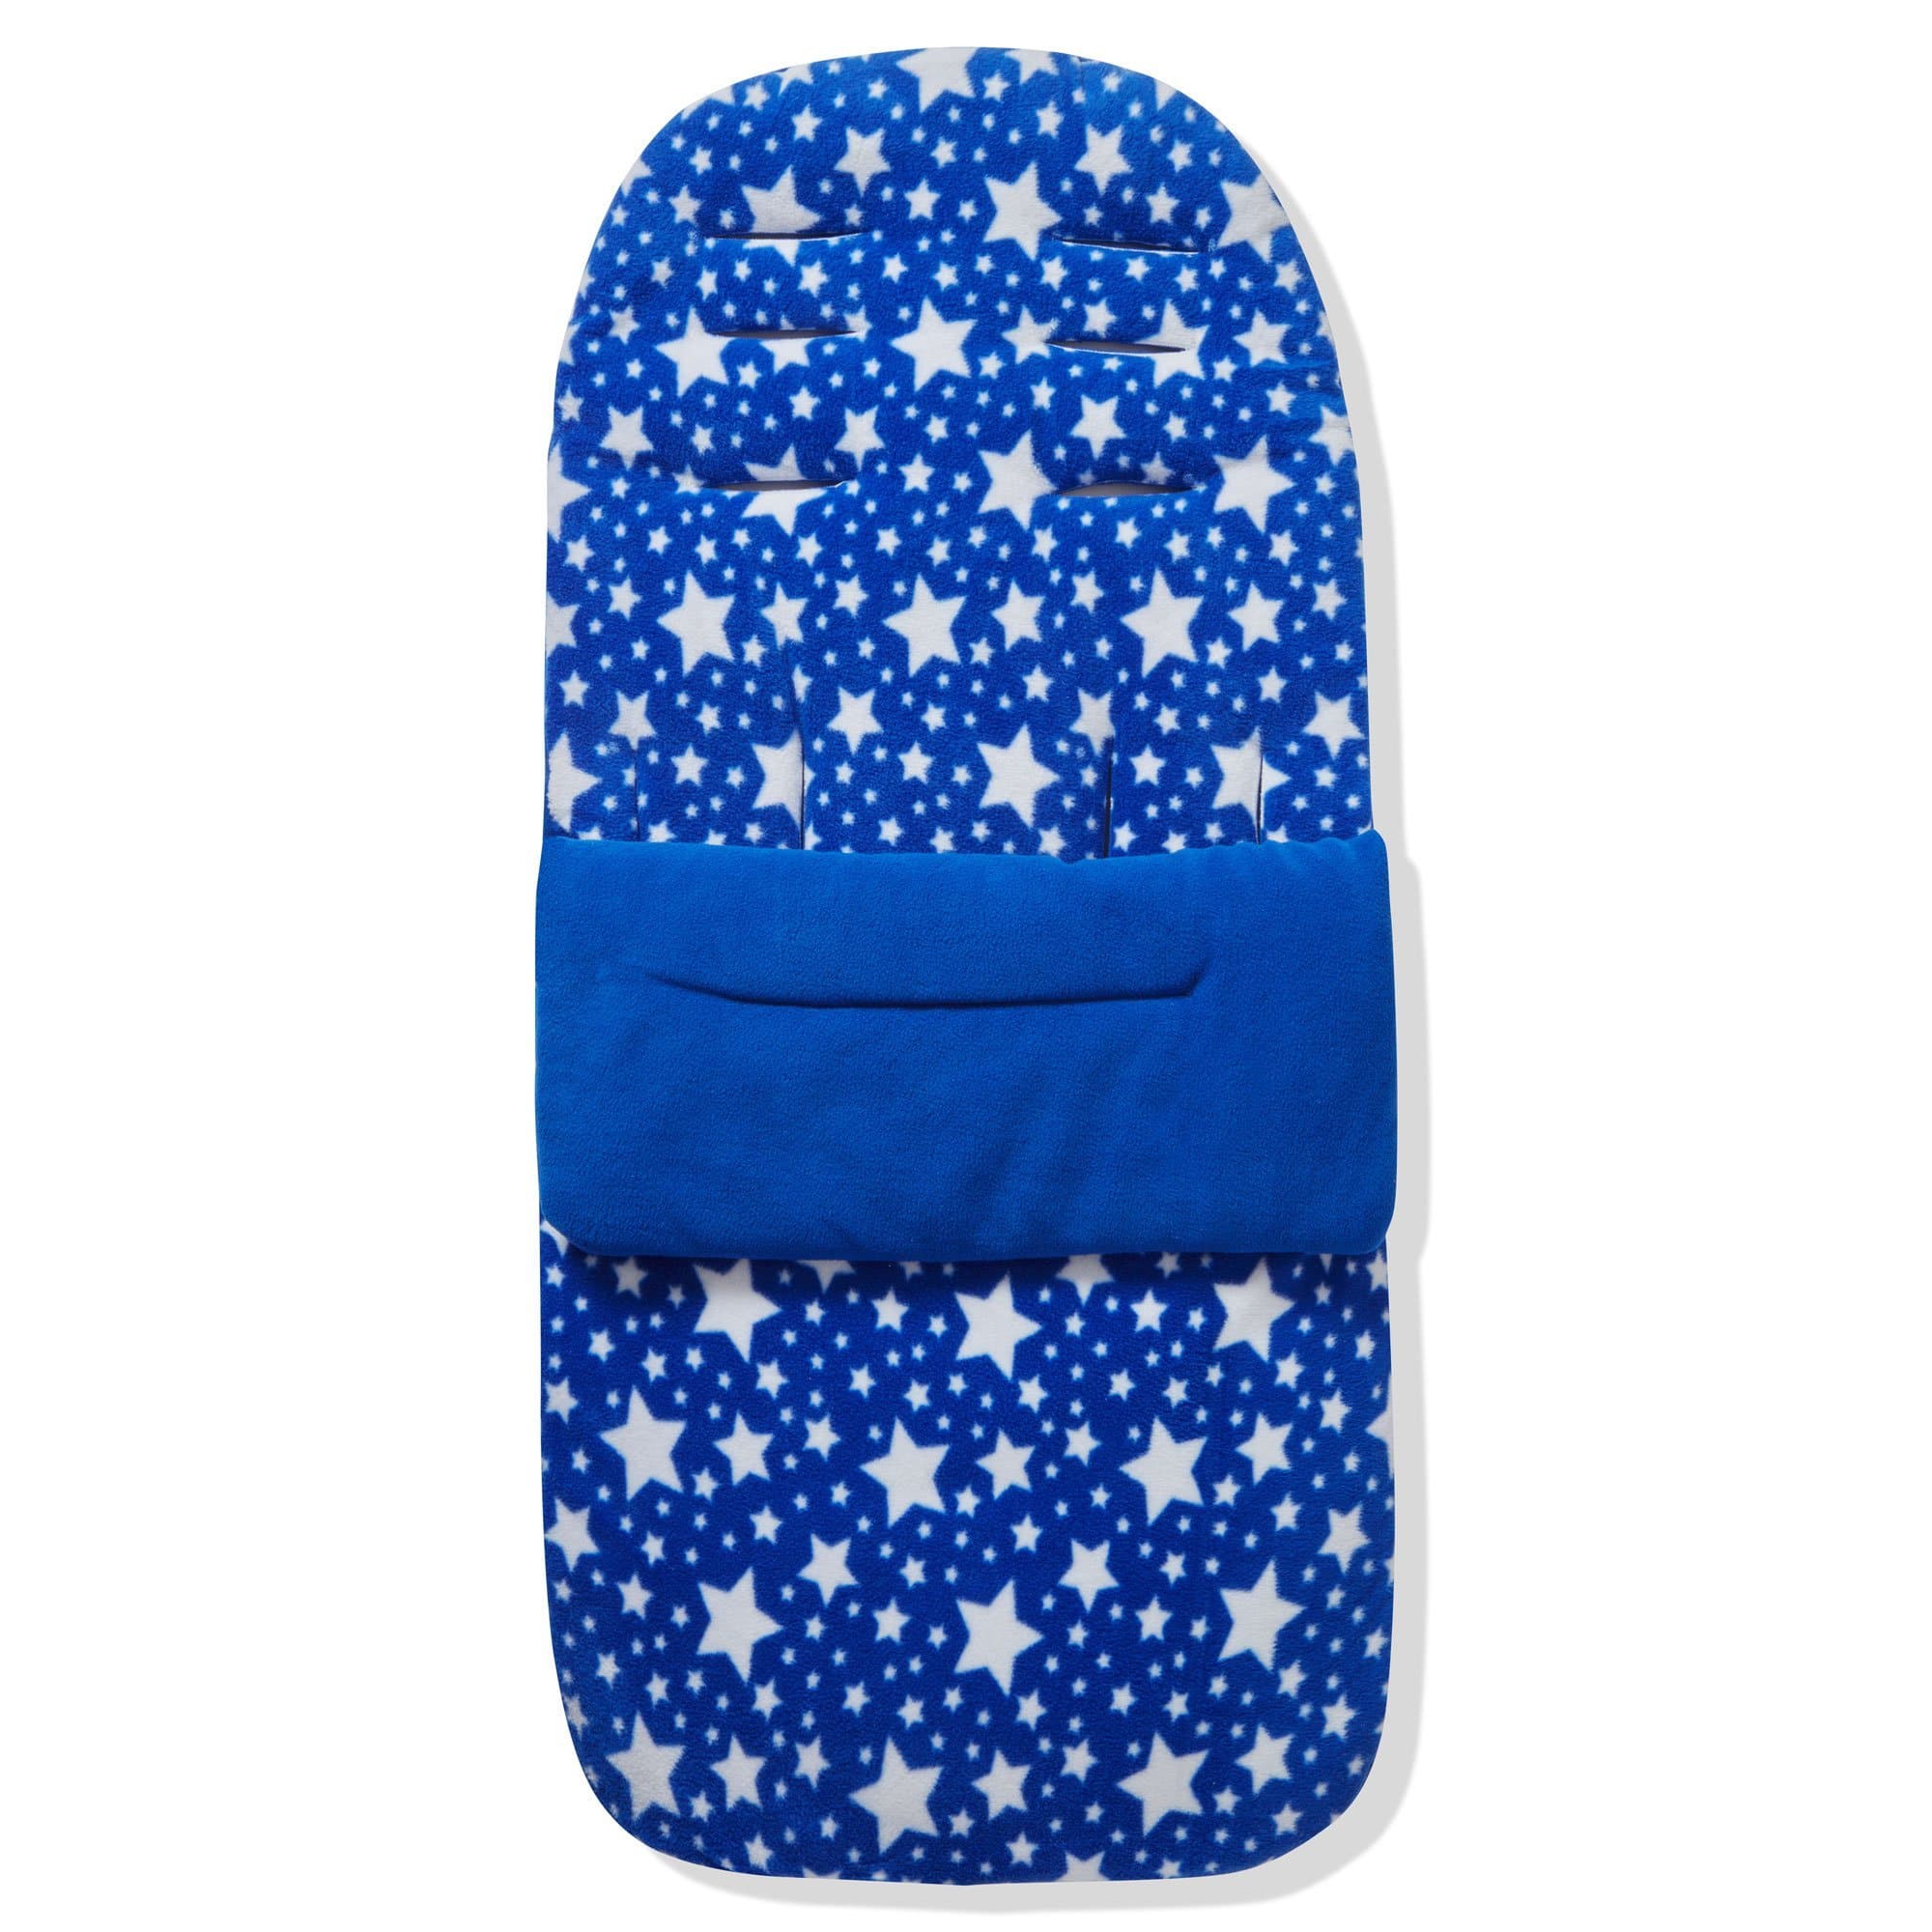 Fleece Footmuff / Cosy Toes Compatible with Quinny - Blue Star / Fits All Models | For Your Little One